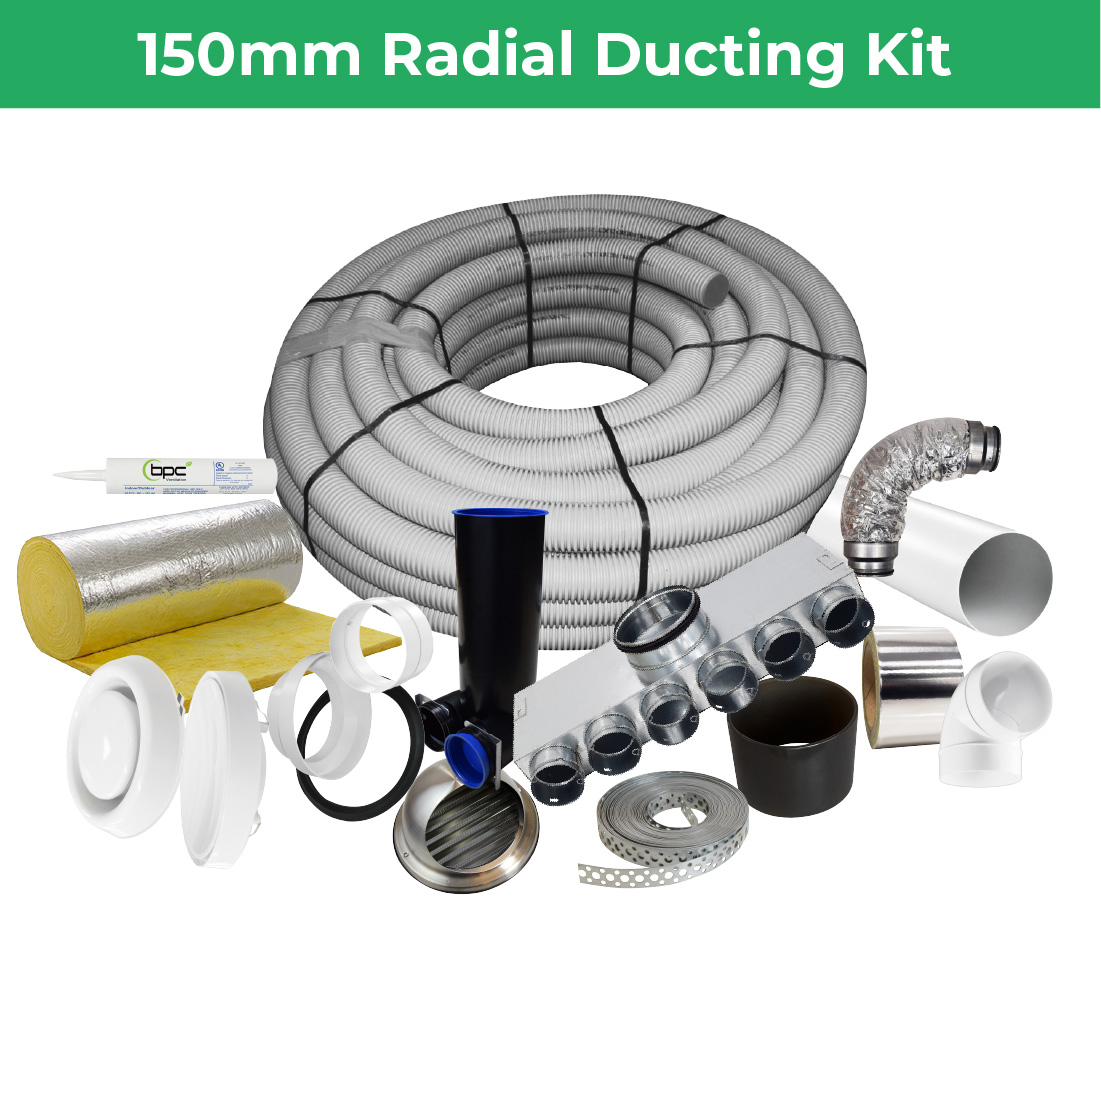 Quiet-Vent 150mm Radial Ducting Kits